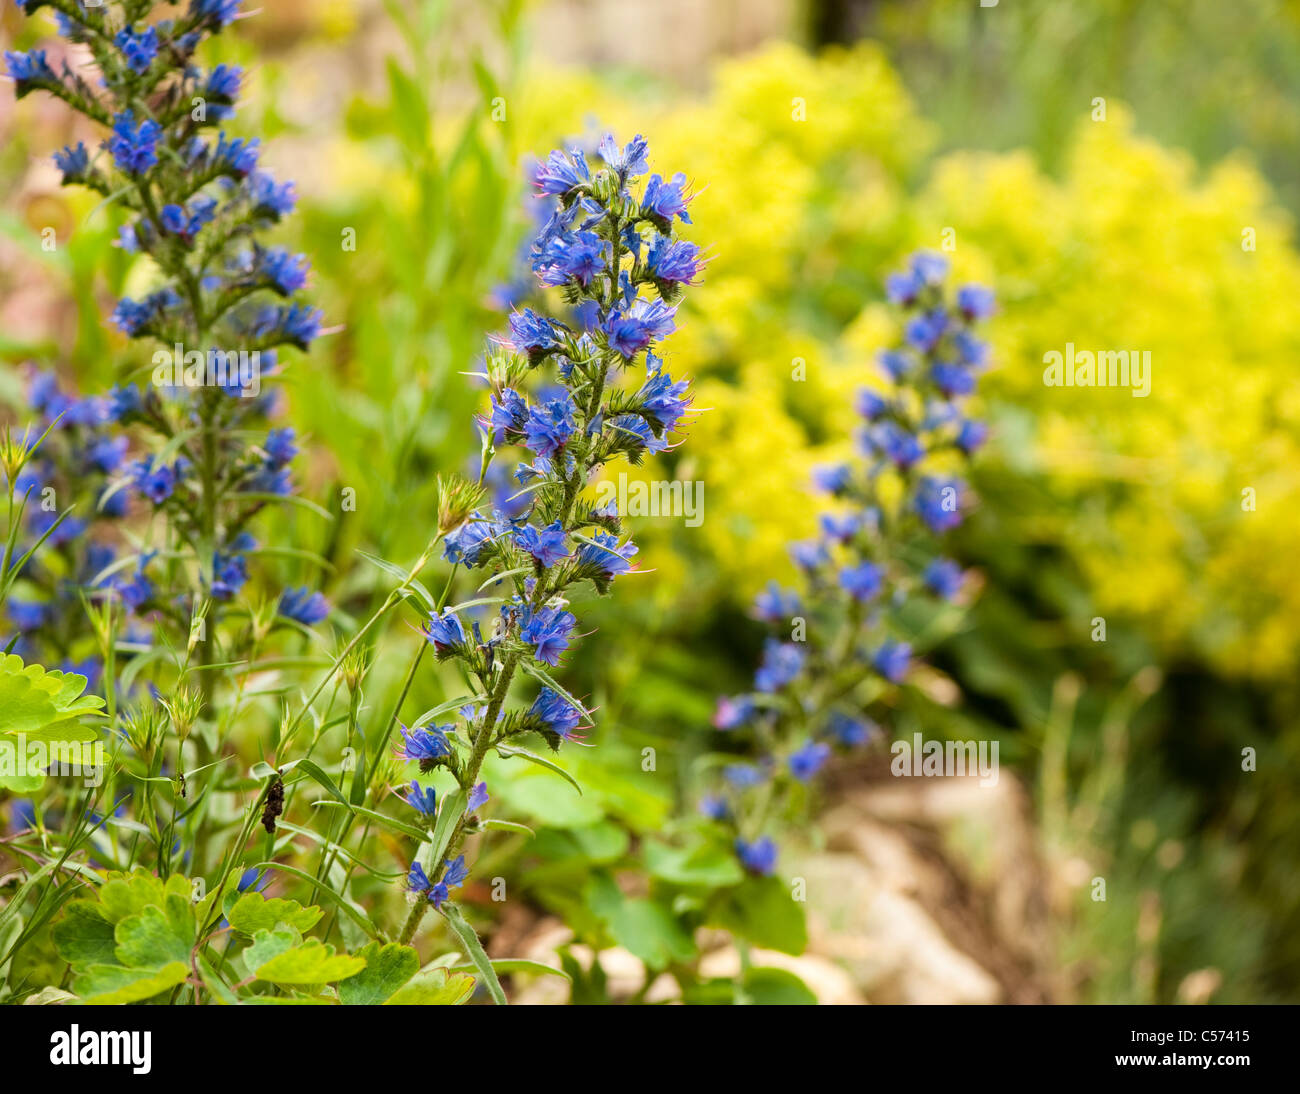 Echium vulgare, Viper's Bugloss or Blueweed and Alchemilla mollis, Lady's Mantle Stock Photo